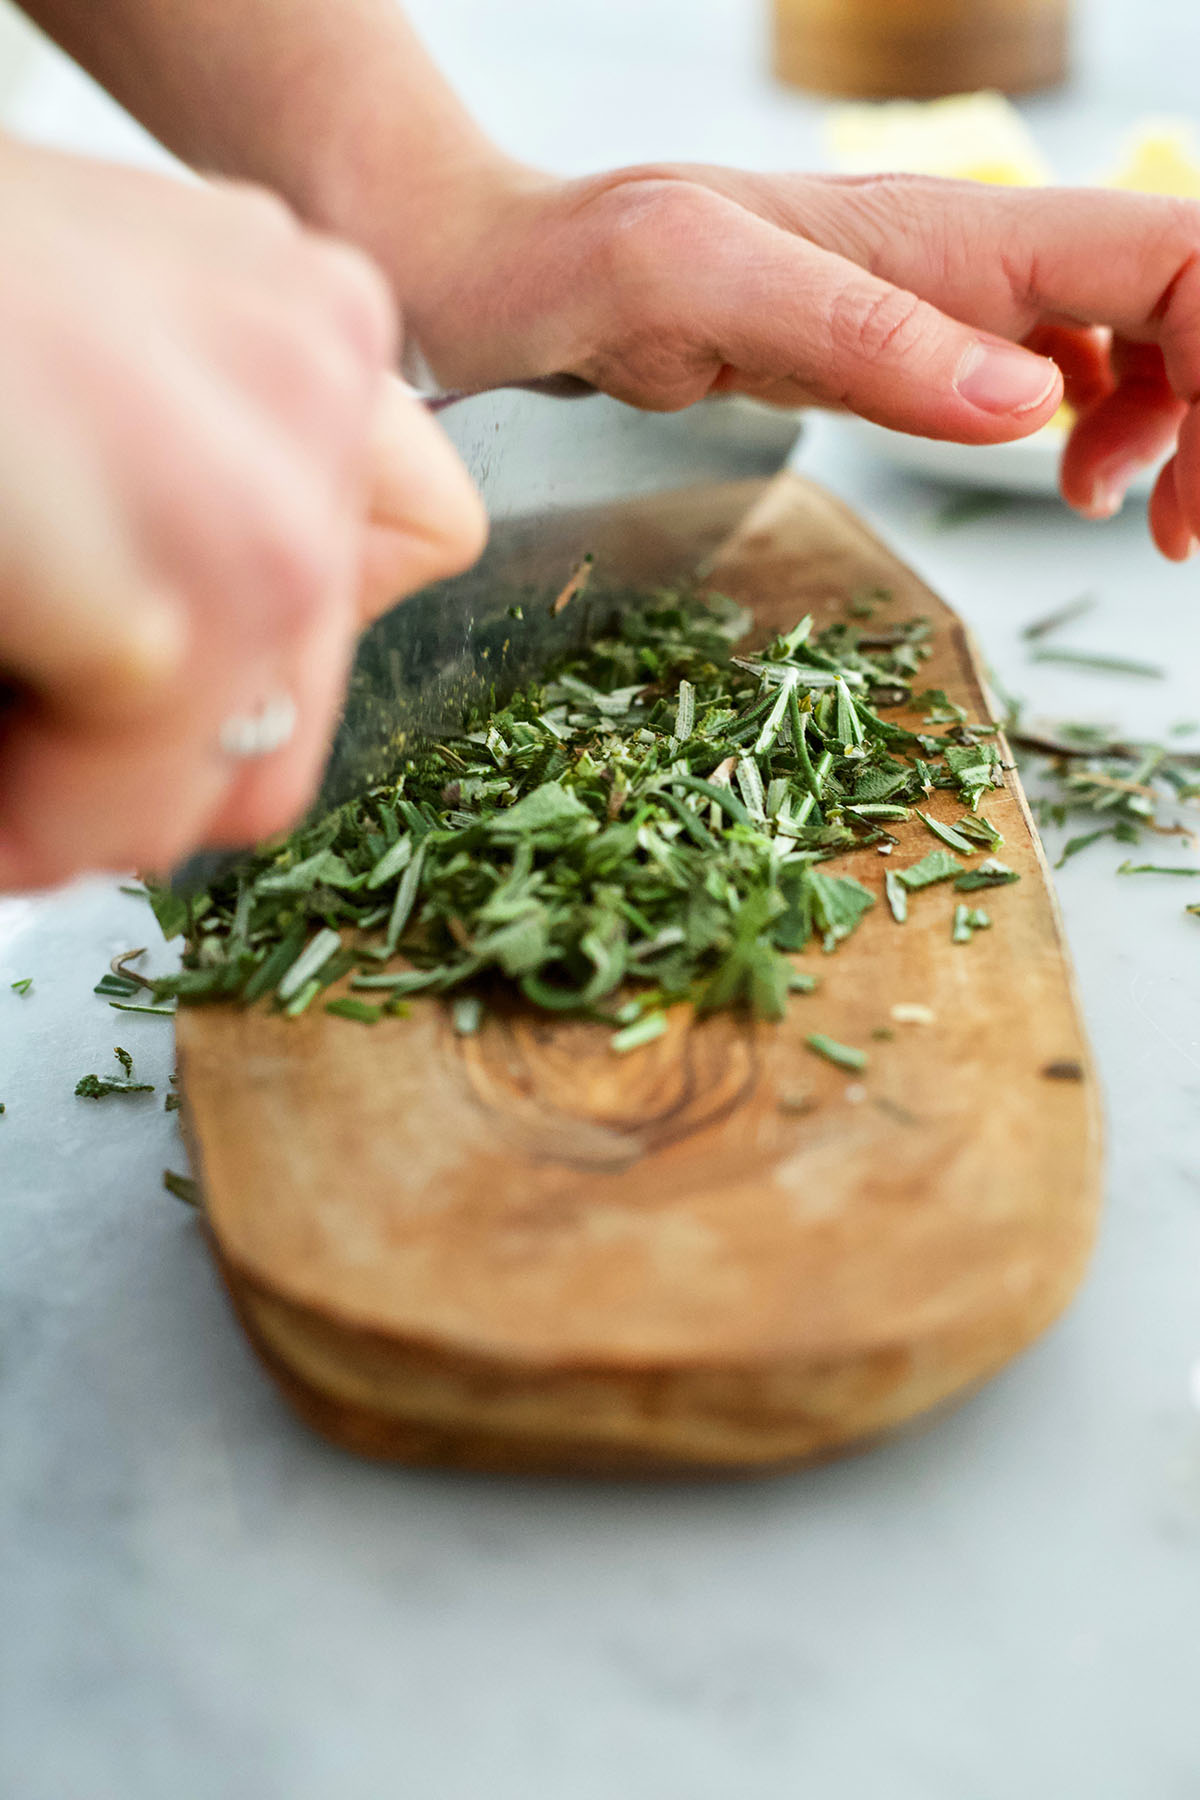 How to Enhance Holiday Cooking with Herbs | Herbal Academy | Here are some tips and tricks to help you include herbs in your holiday dishes. Plus, get a free chart with 20 herbs to enhance your holiday cooking, too!